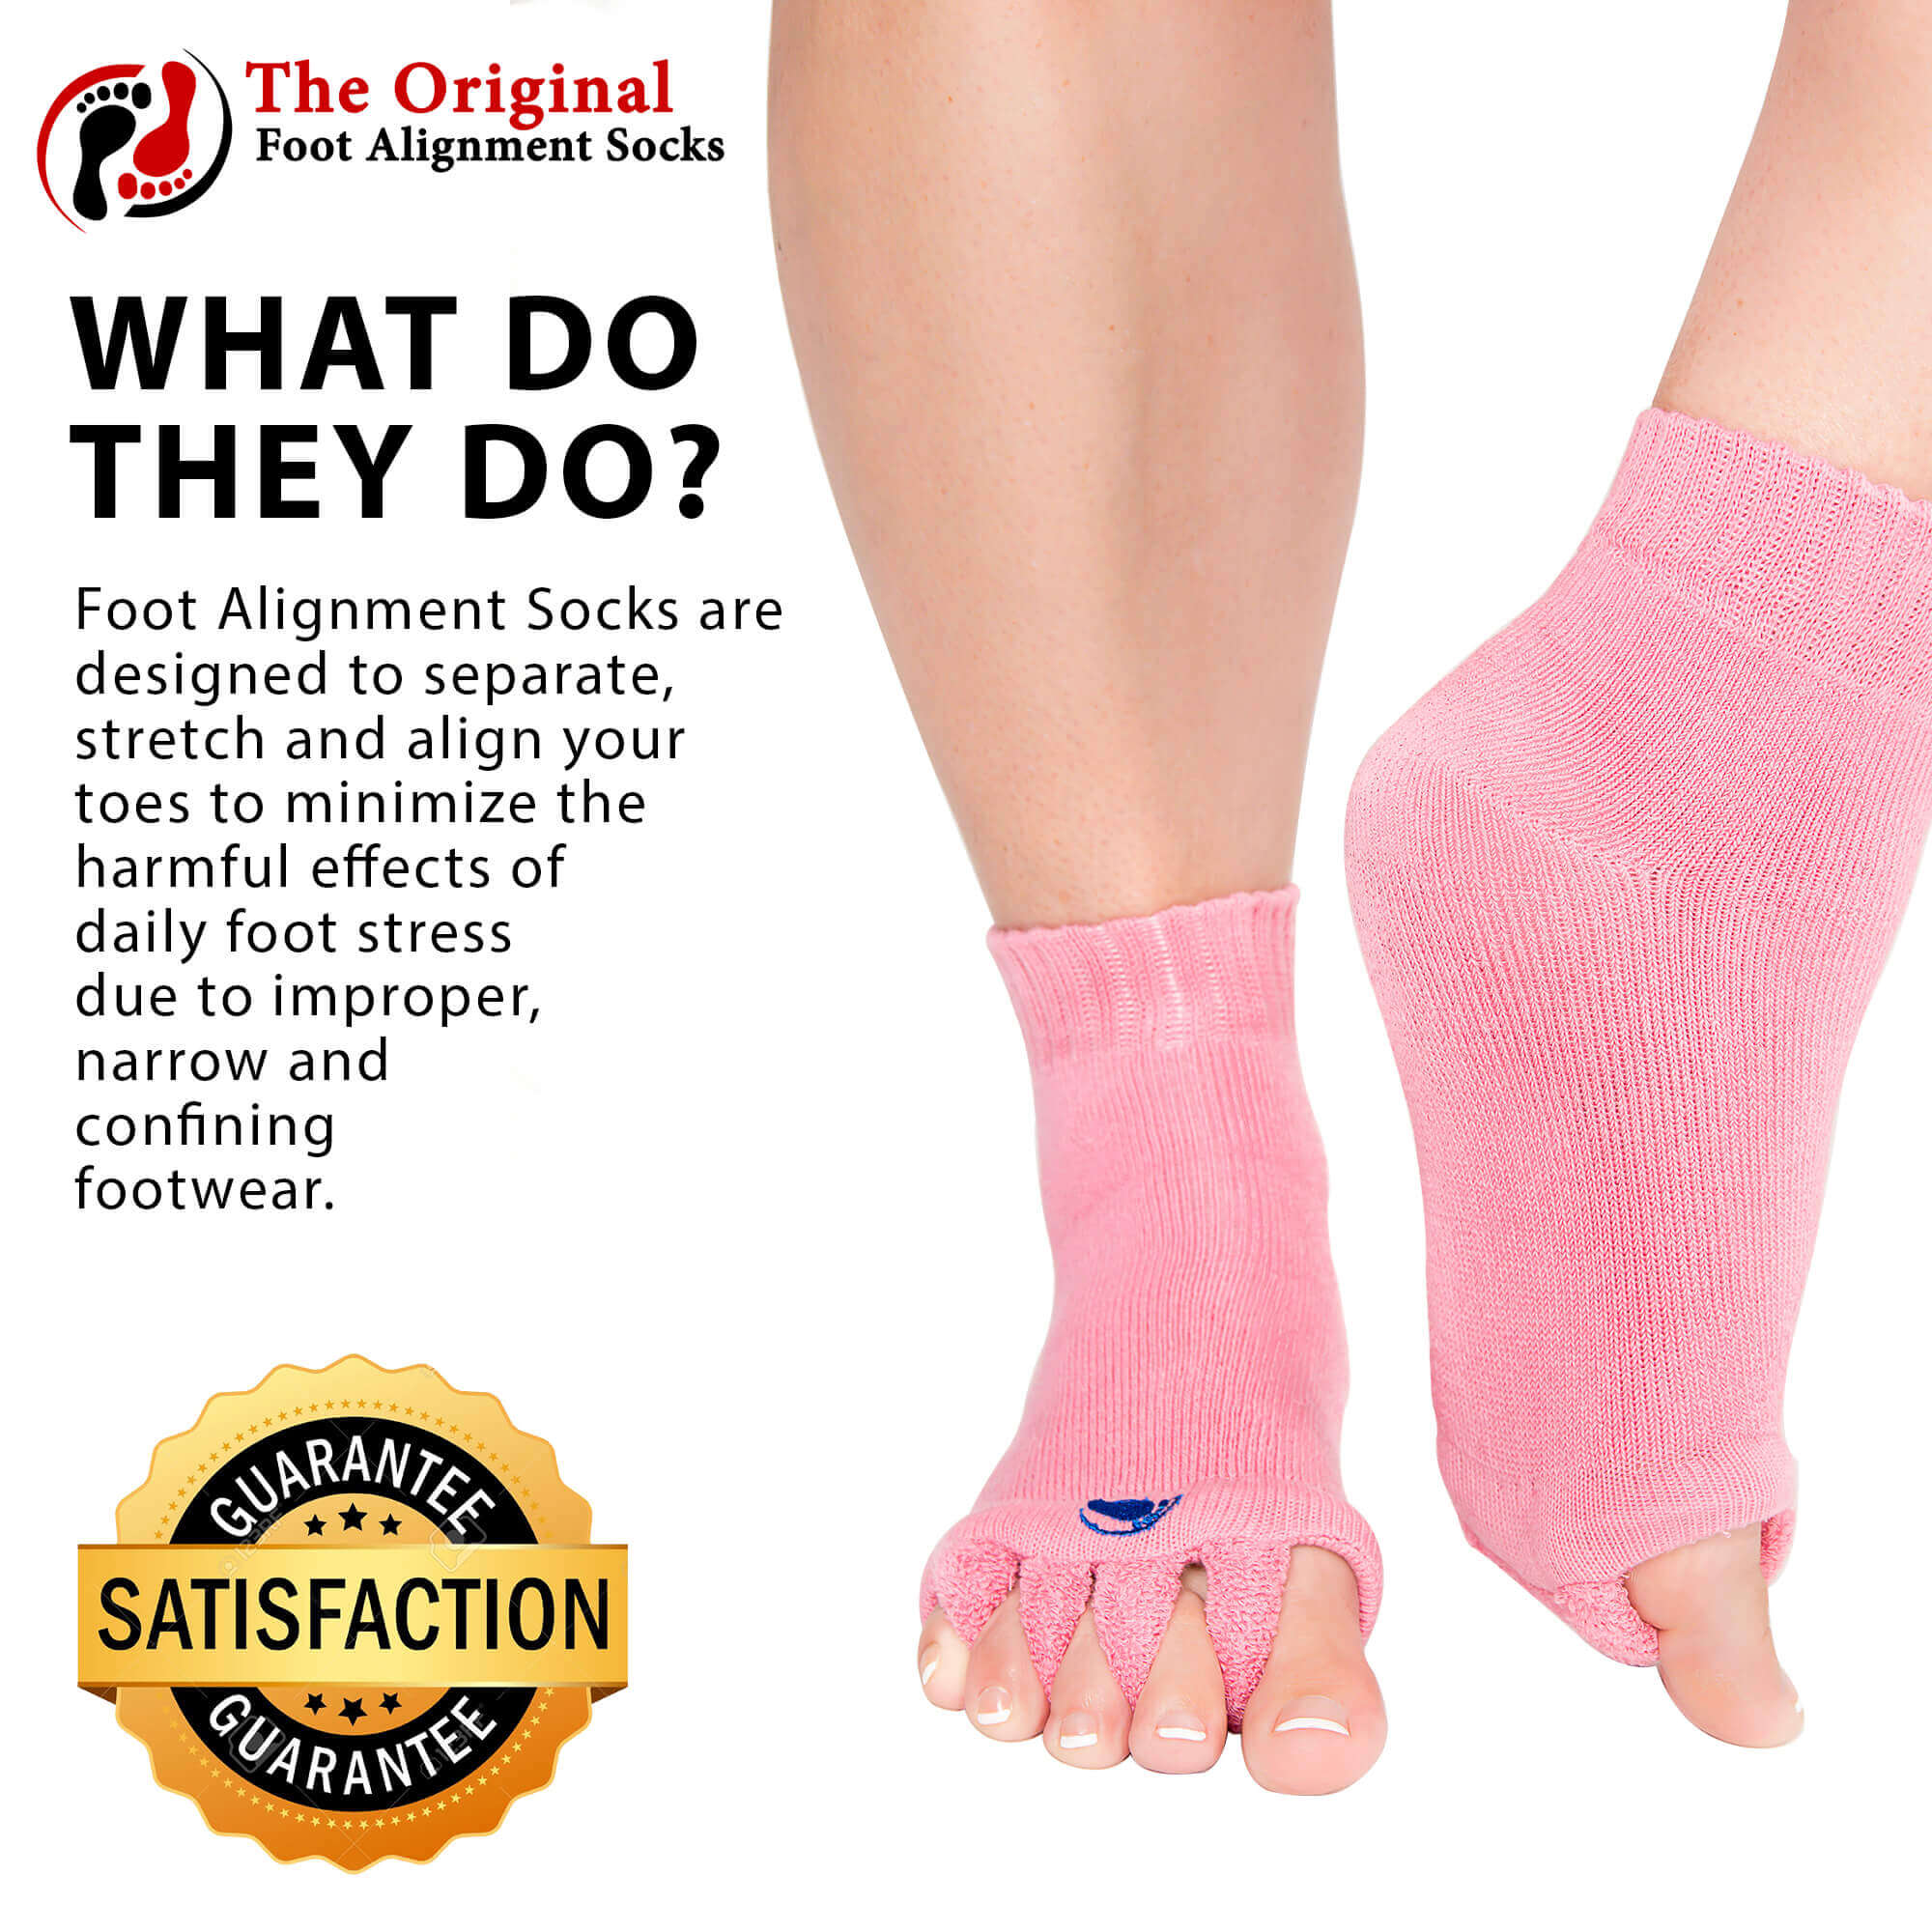 Sore, tired feet find relief with Cute Pink Foot Alignment Socks. – My-Happy  Feet - The Original Foot Alignment Socks